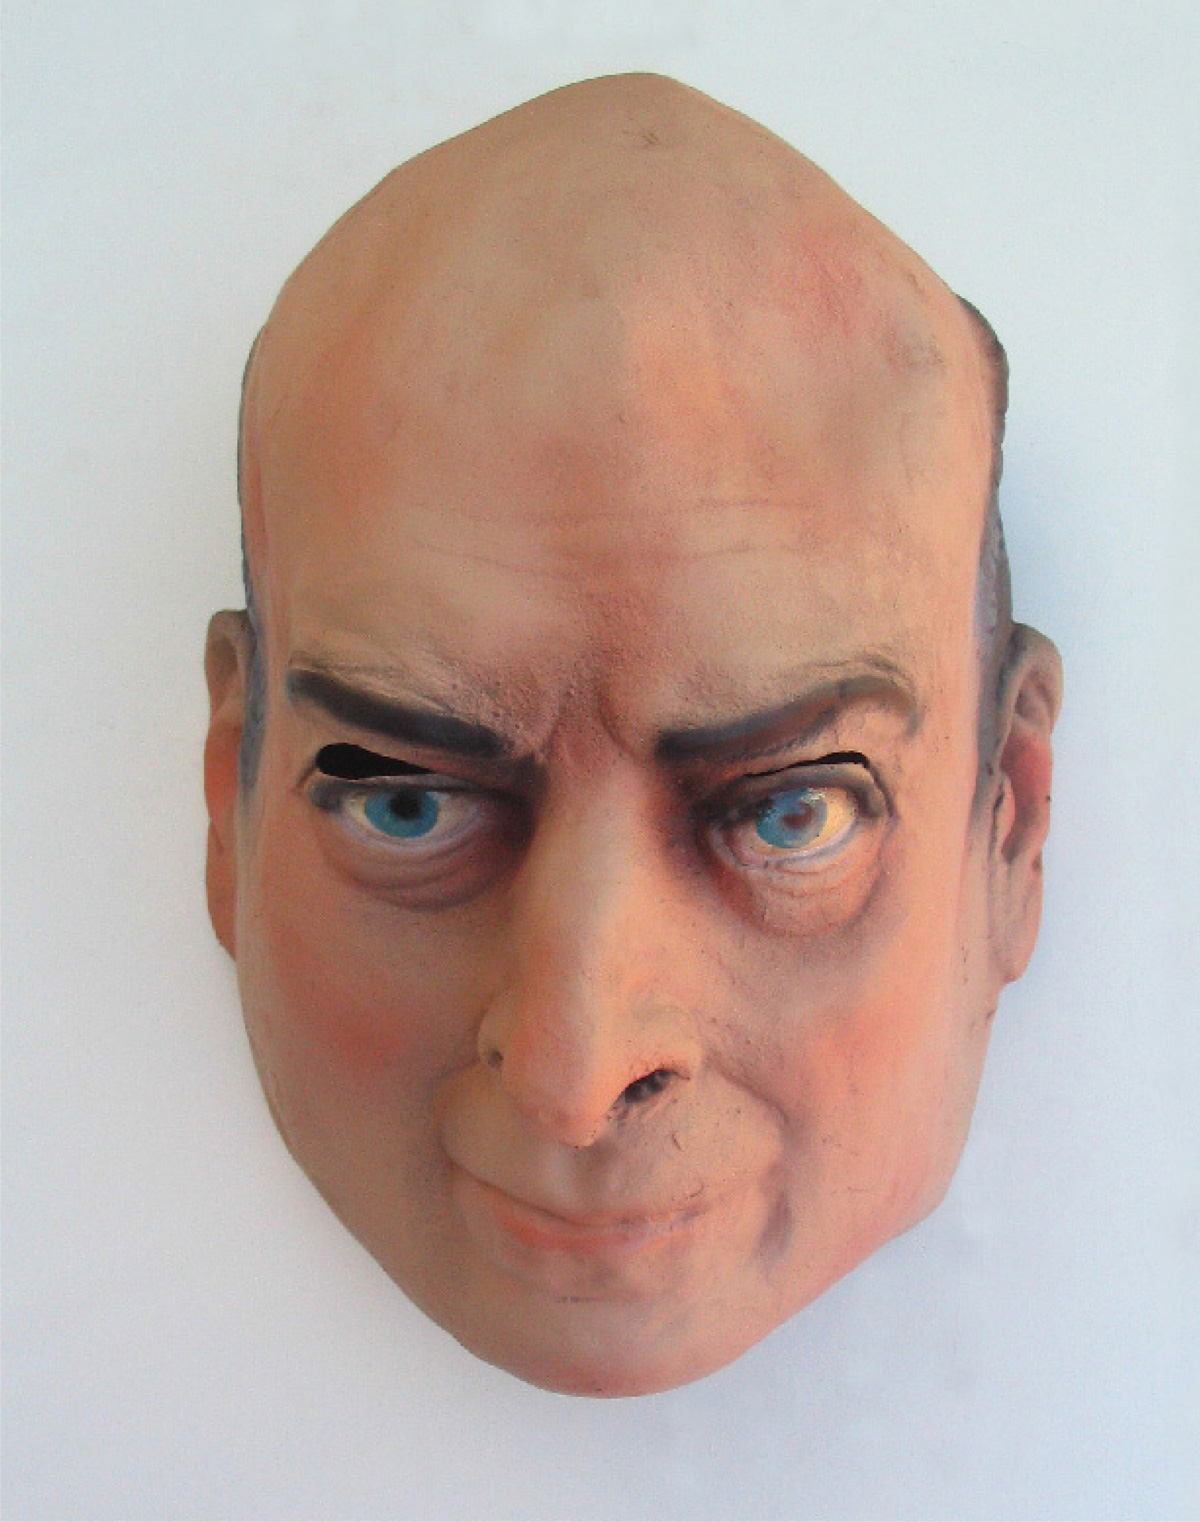 A photograph of a mask of Domingo Cavallo, Minister of Economy in Argentina from 1991 to 1996. 